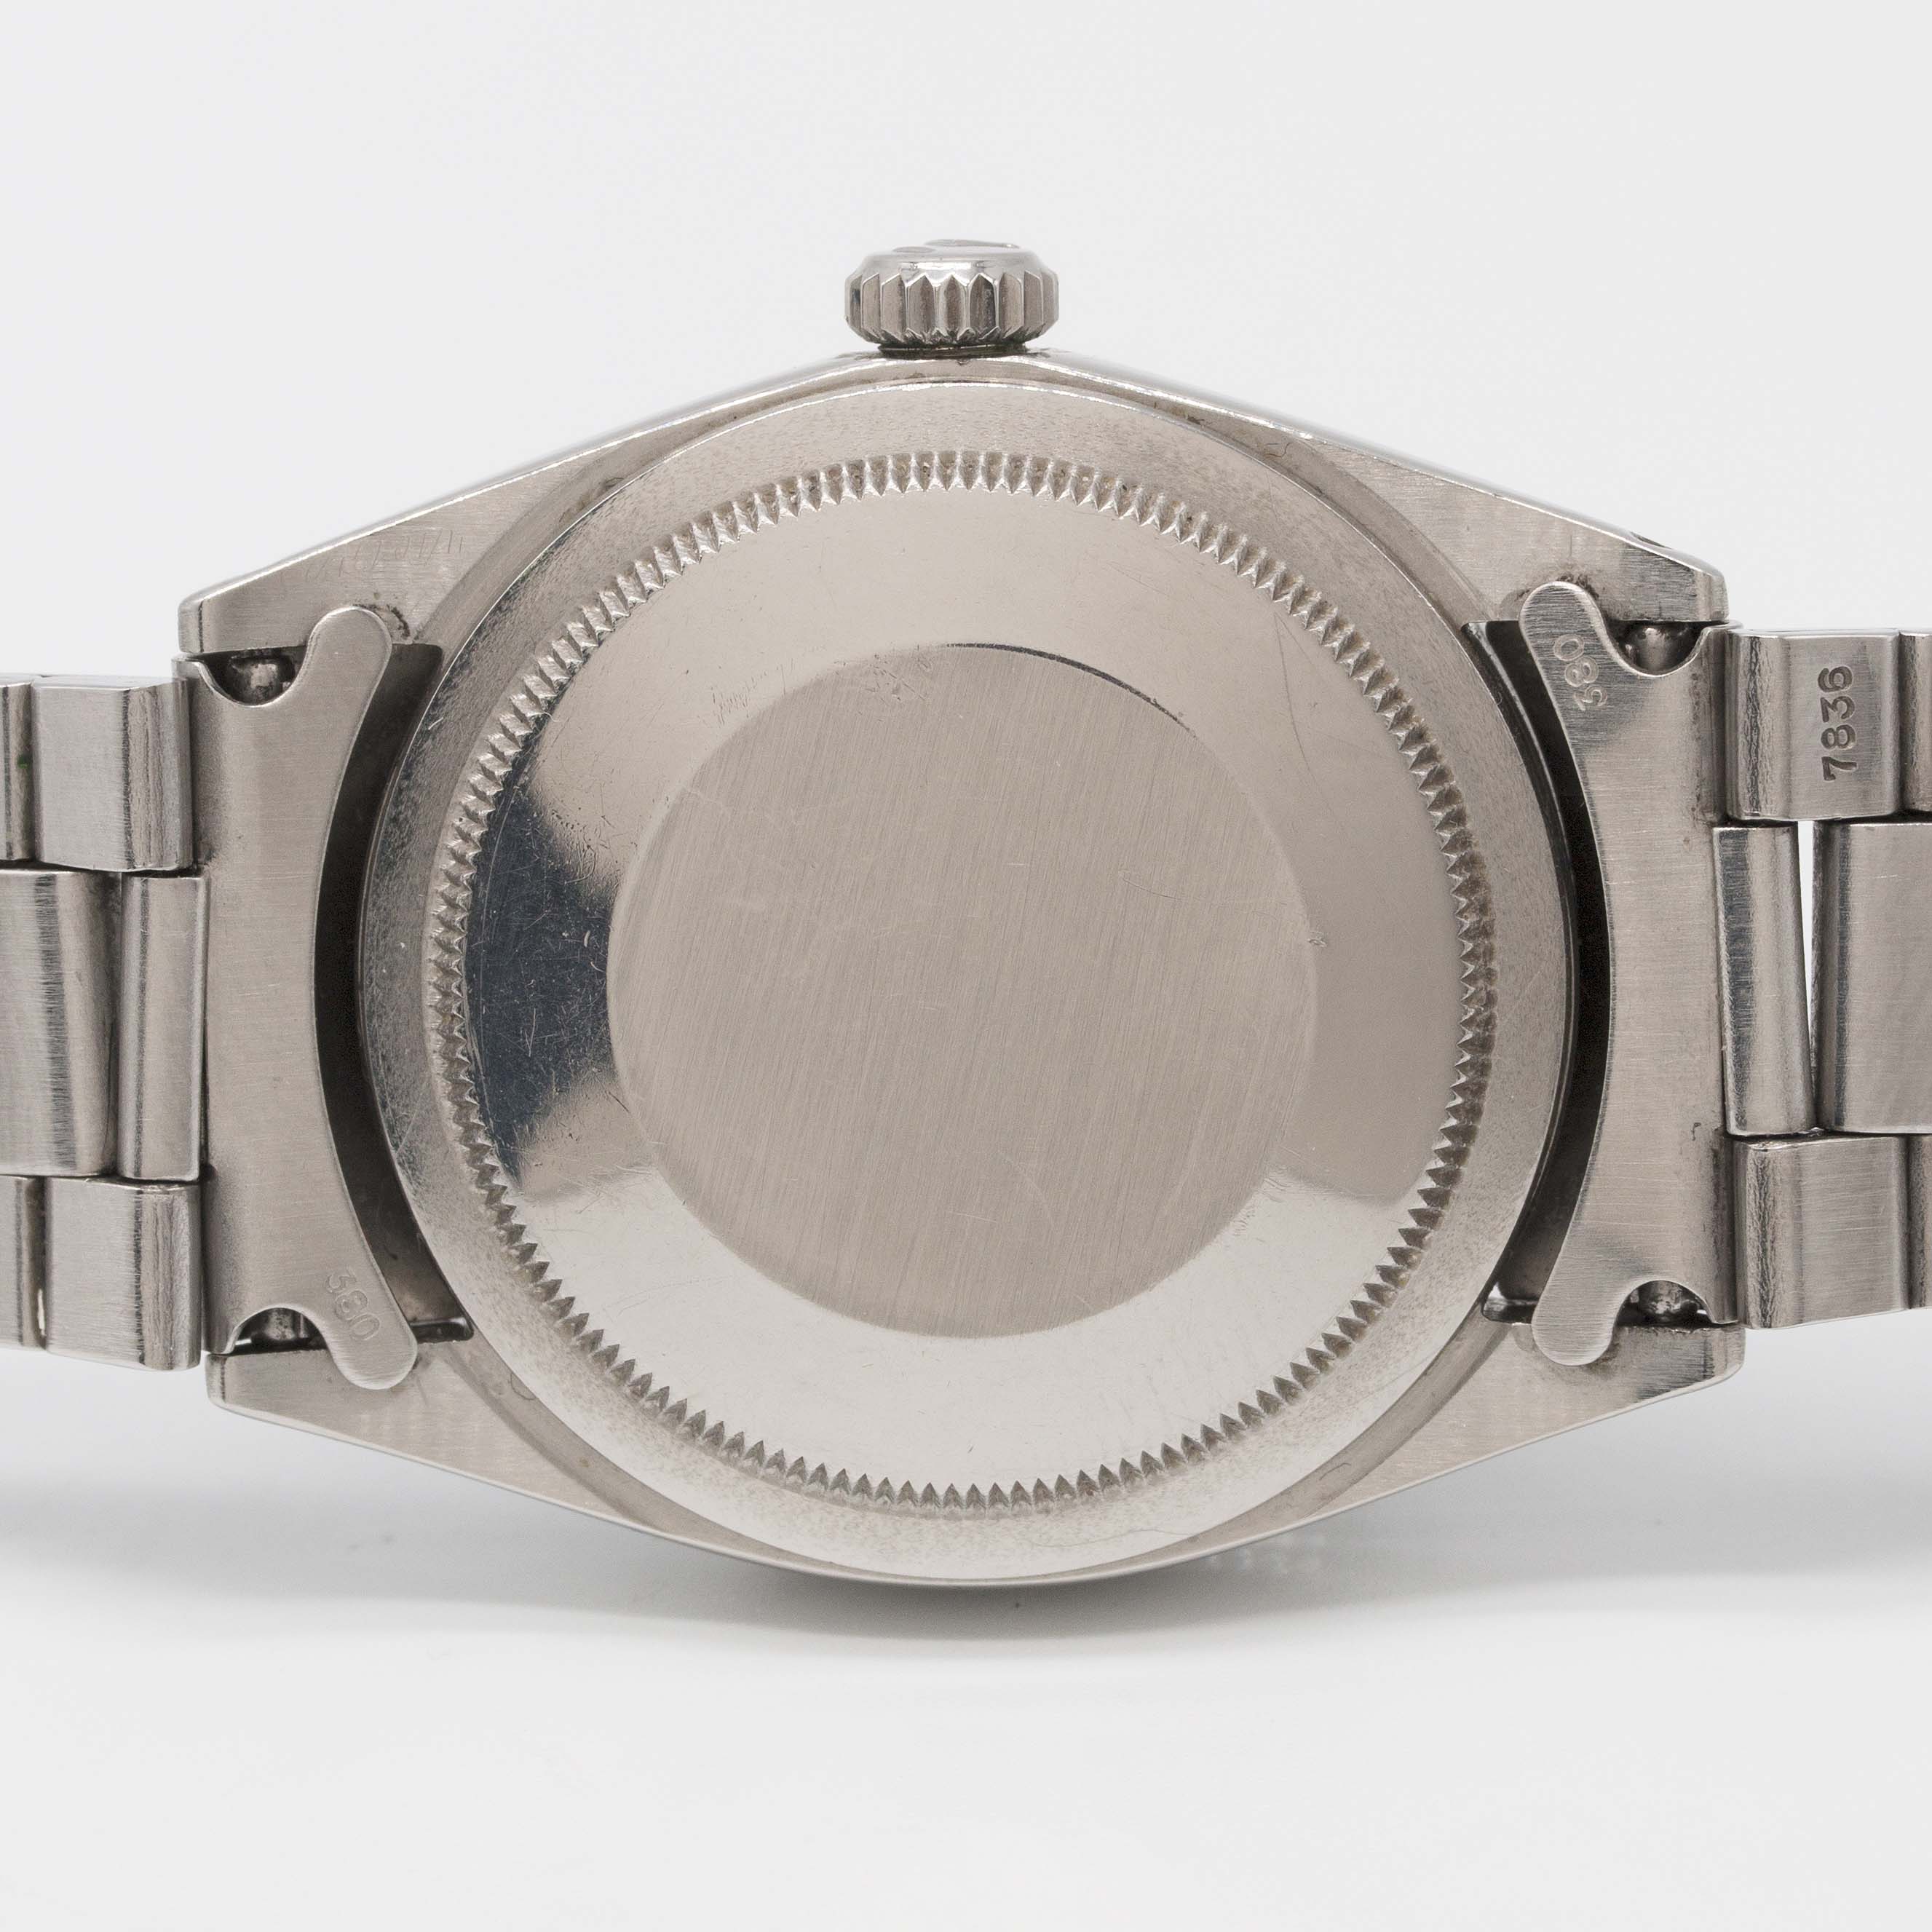 A RARE GENTLEMAN'S STAINLESS STEEL ROLEX OYSTER PERPETUAL EXPLORER BRACELET WATCH CIRCA 1972, REF. - Image 9 of 13